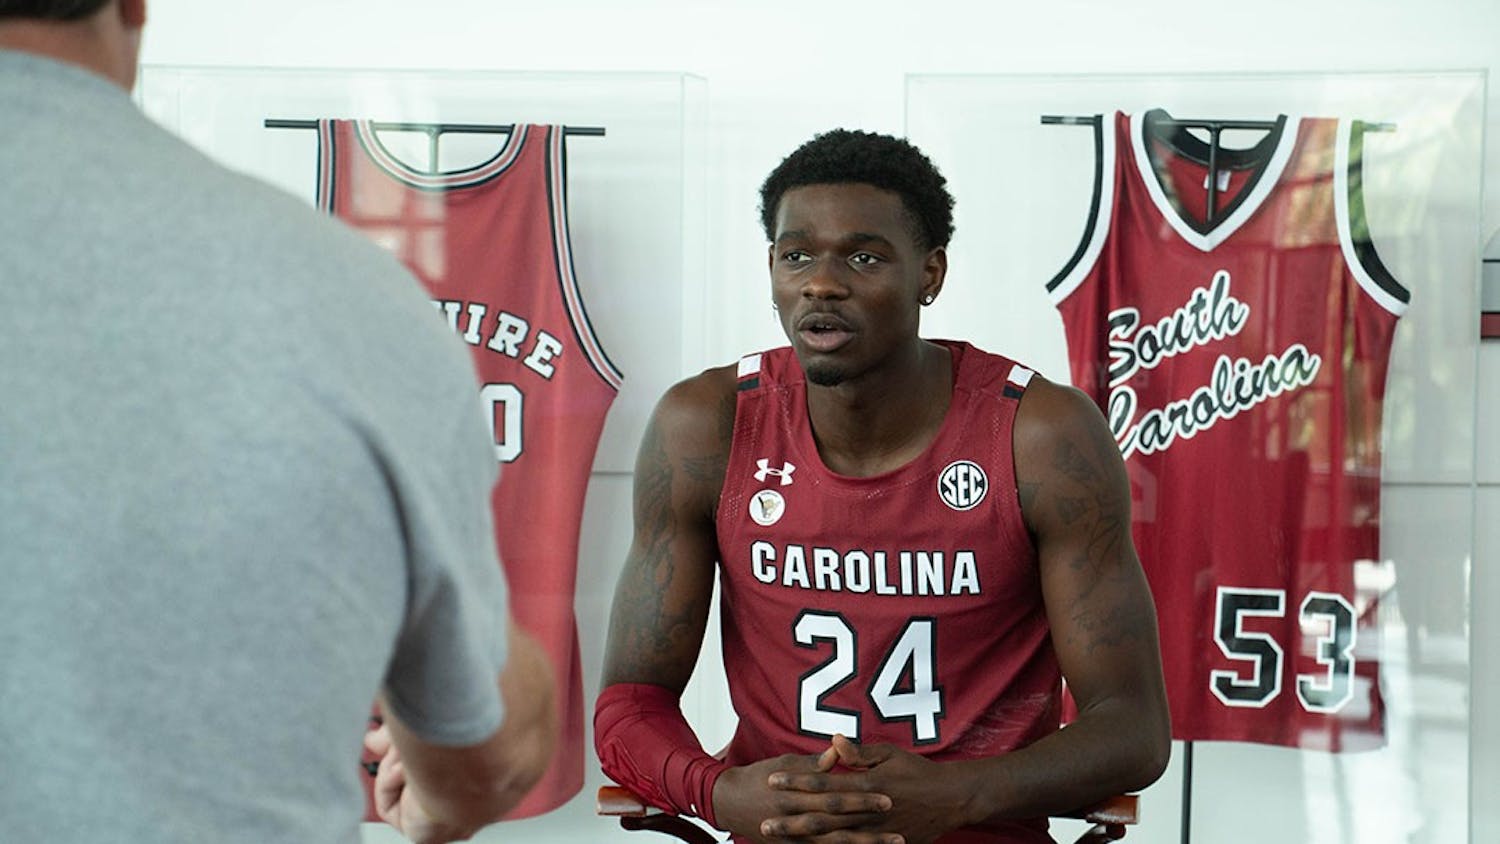 Senior forward Keyshawn Bryant speaks to the press during the team's media day on Oct. 14, 2021. Bryant and redshirt junior guard Jermaine Couisnard took advantage of a new rule that allows players to undergo the draft process and returned to the Gamecocks basketball team for the 2022 season.